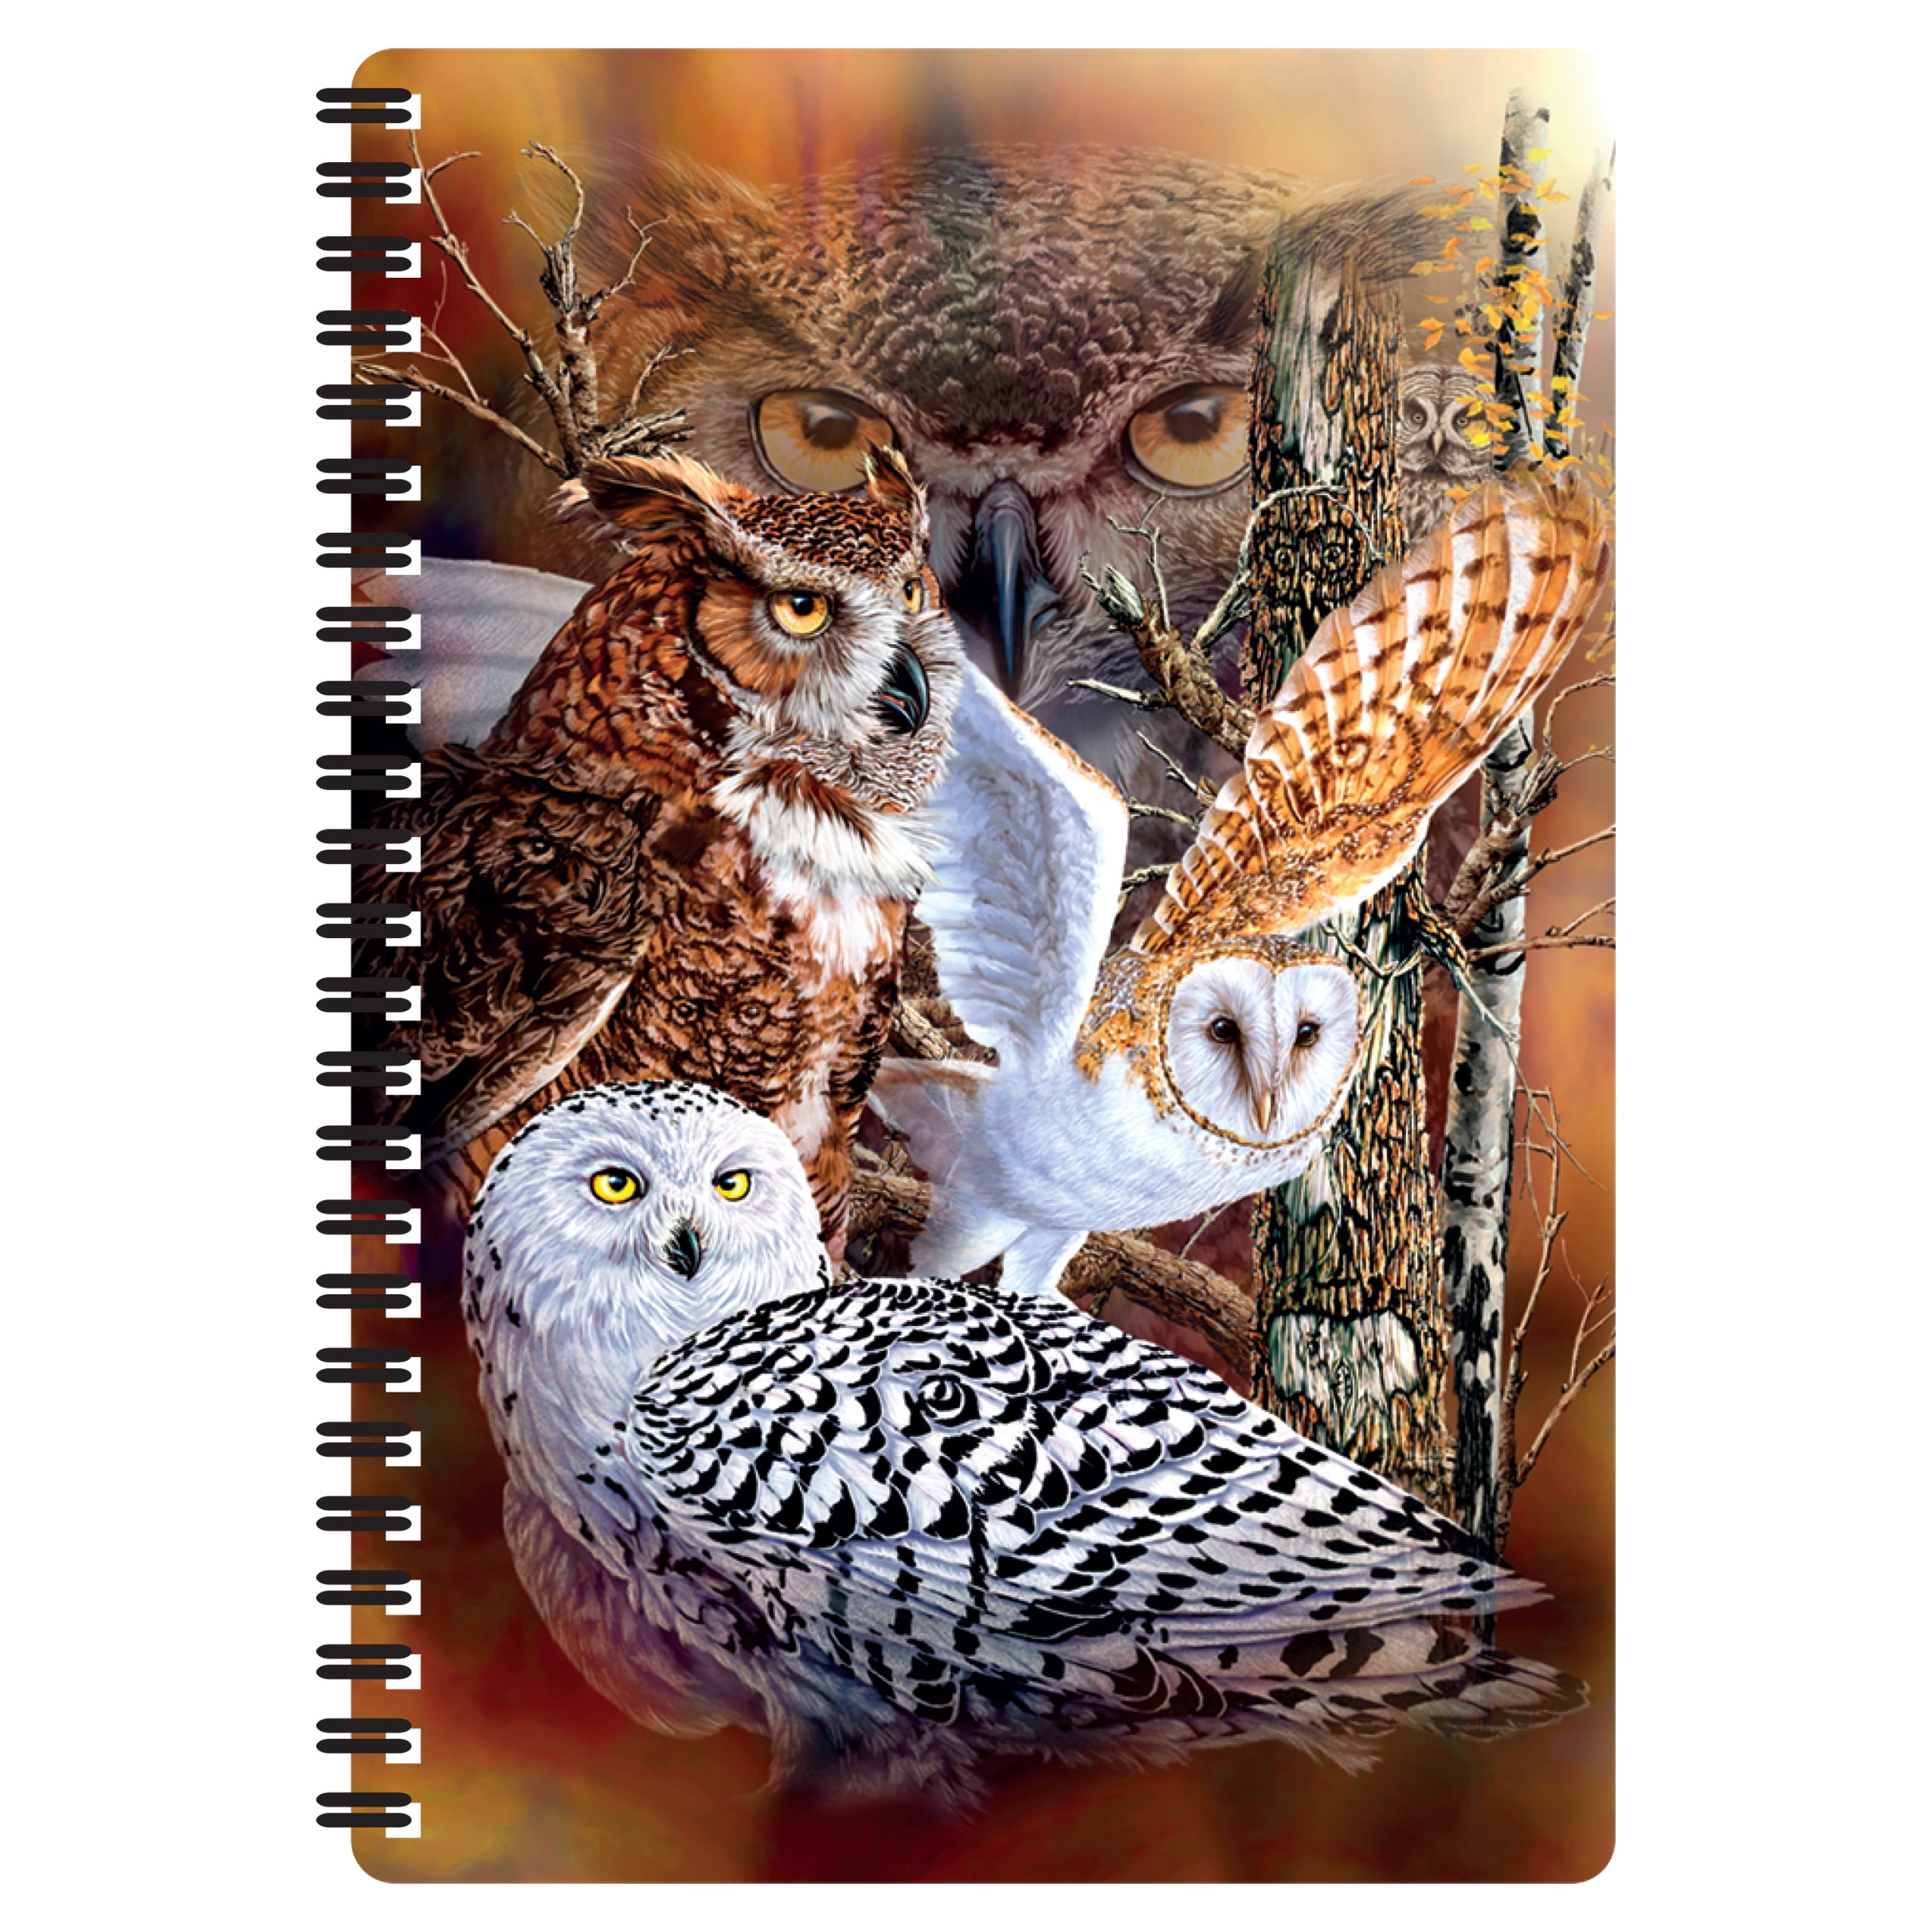 3D LiveLife Notebook - Owl Woods from Deluxebase. 80 Page Lined ...